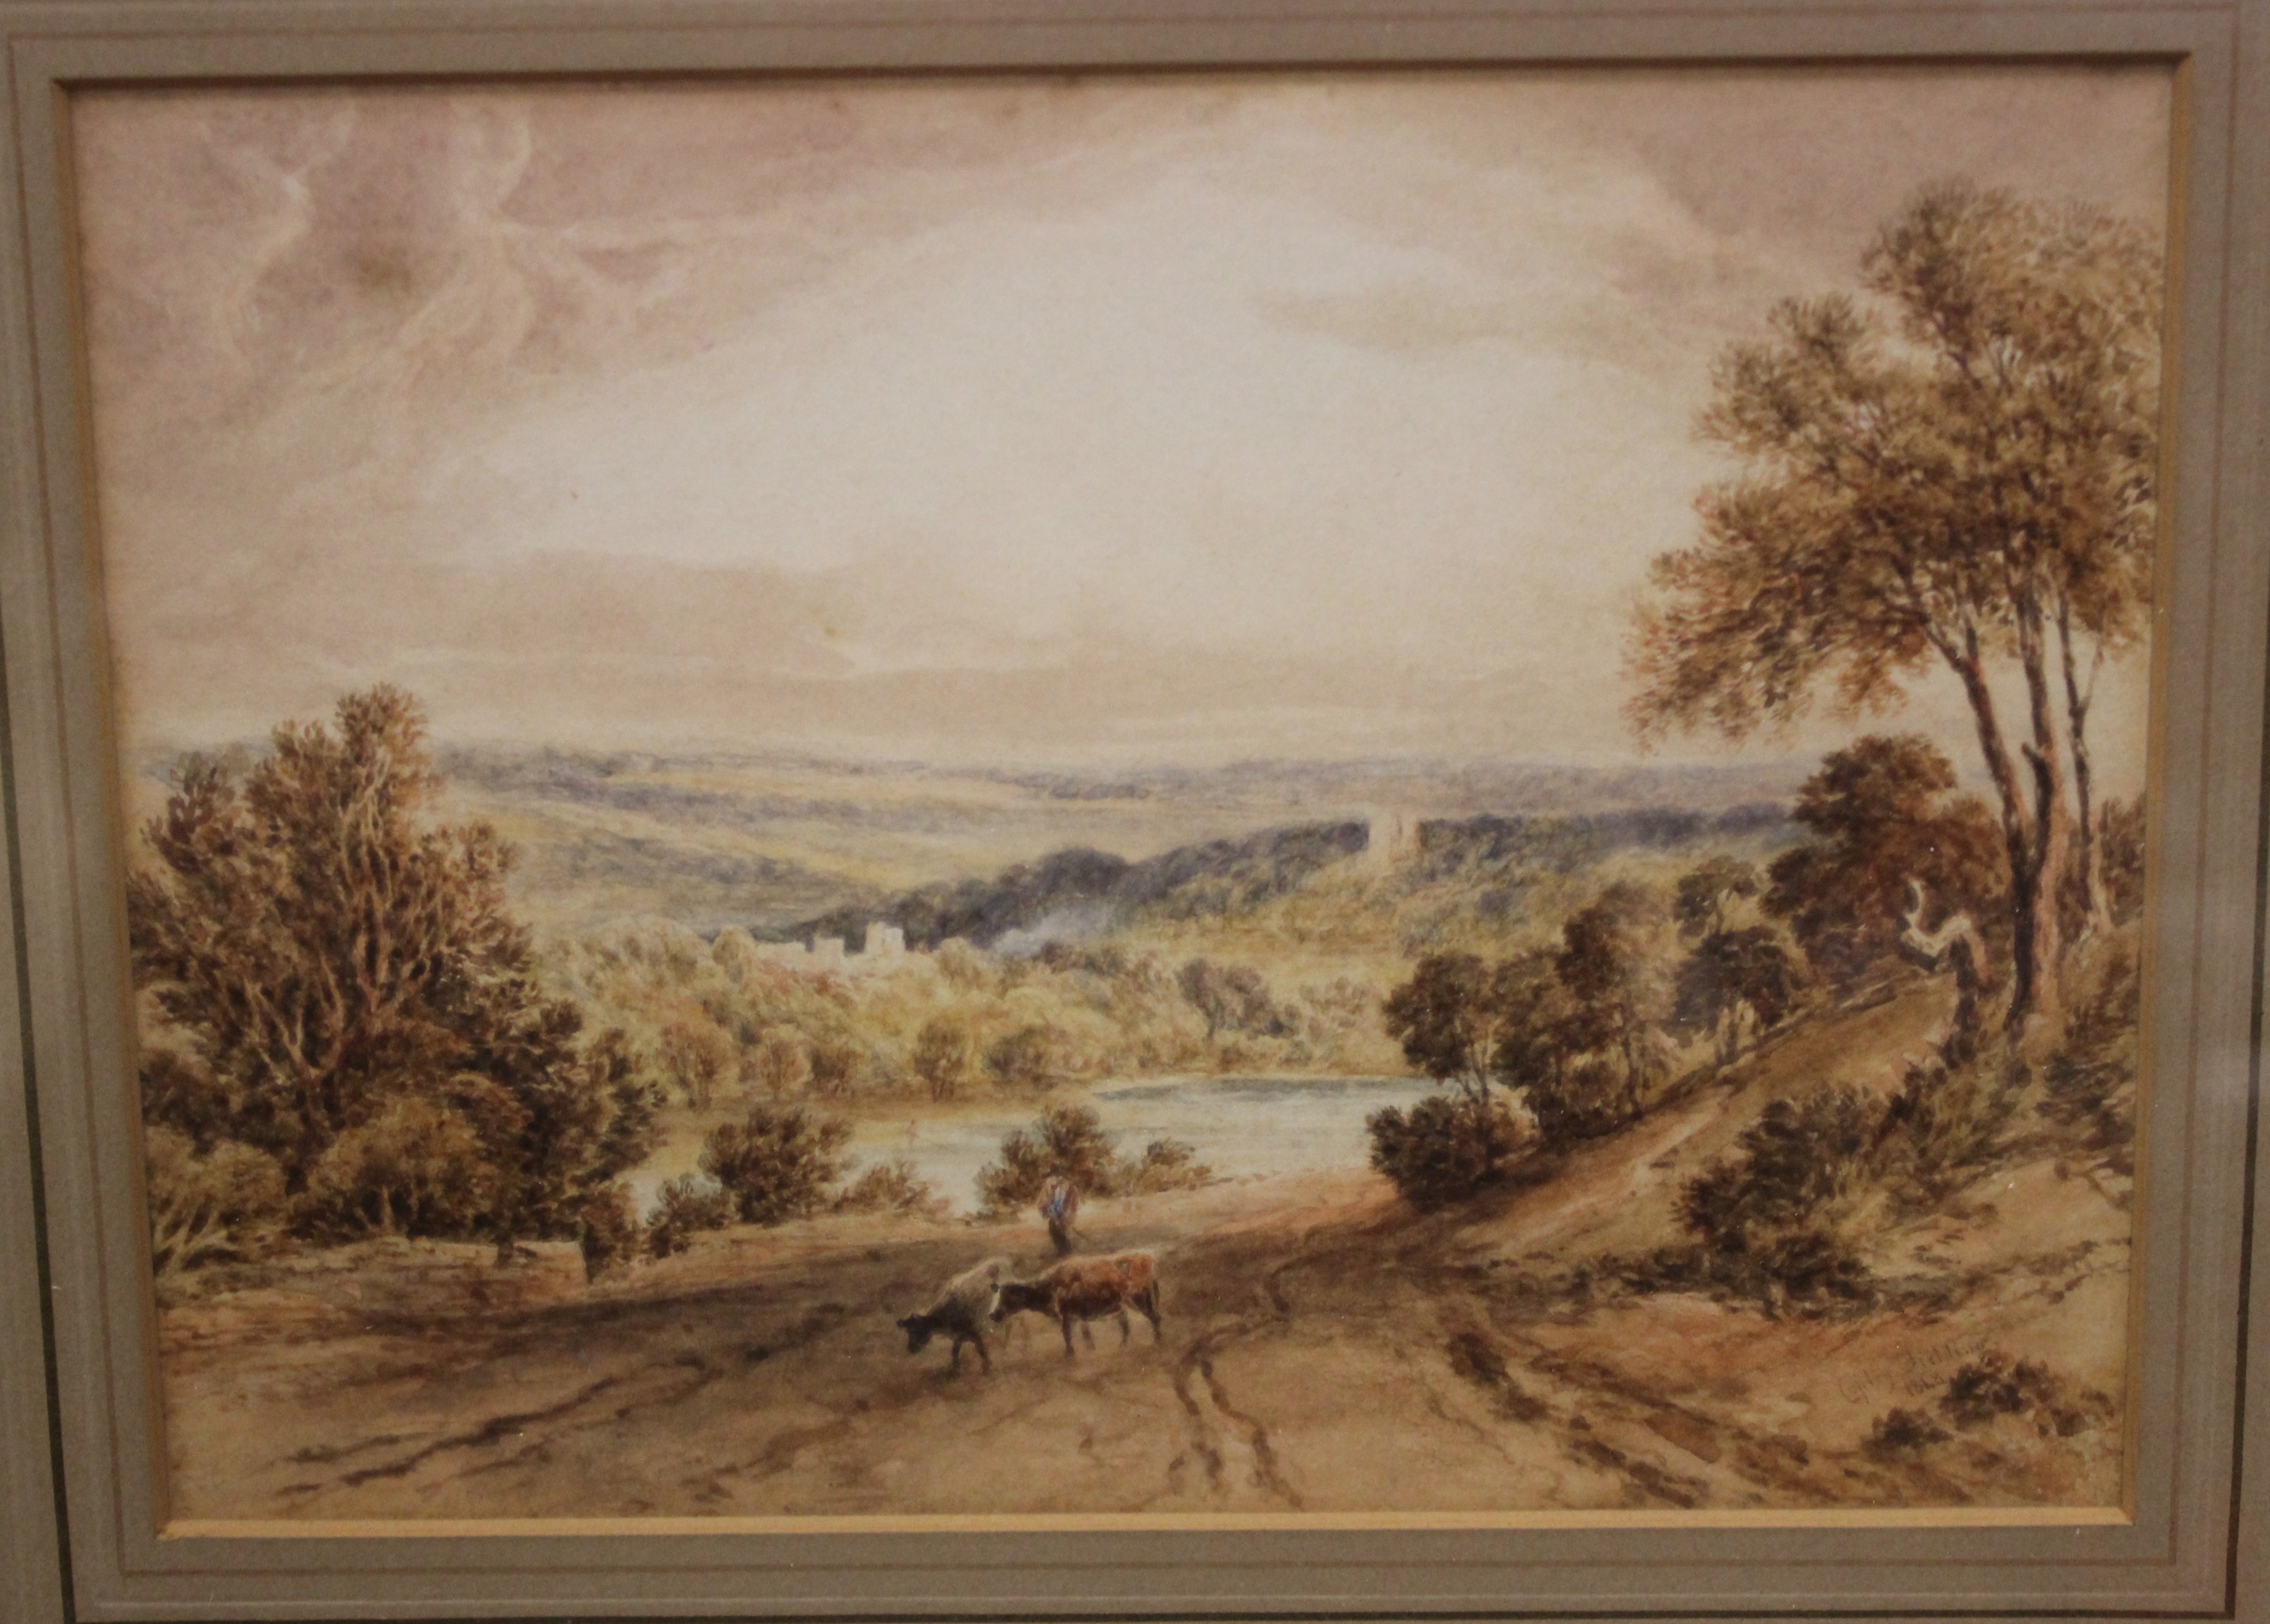 Attributed to Copley Fielding (1787 - 1855)Landscape with cowsWatercolourSigned and dated 1848 ,